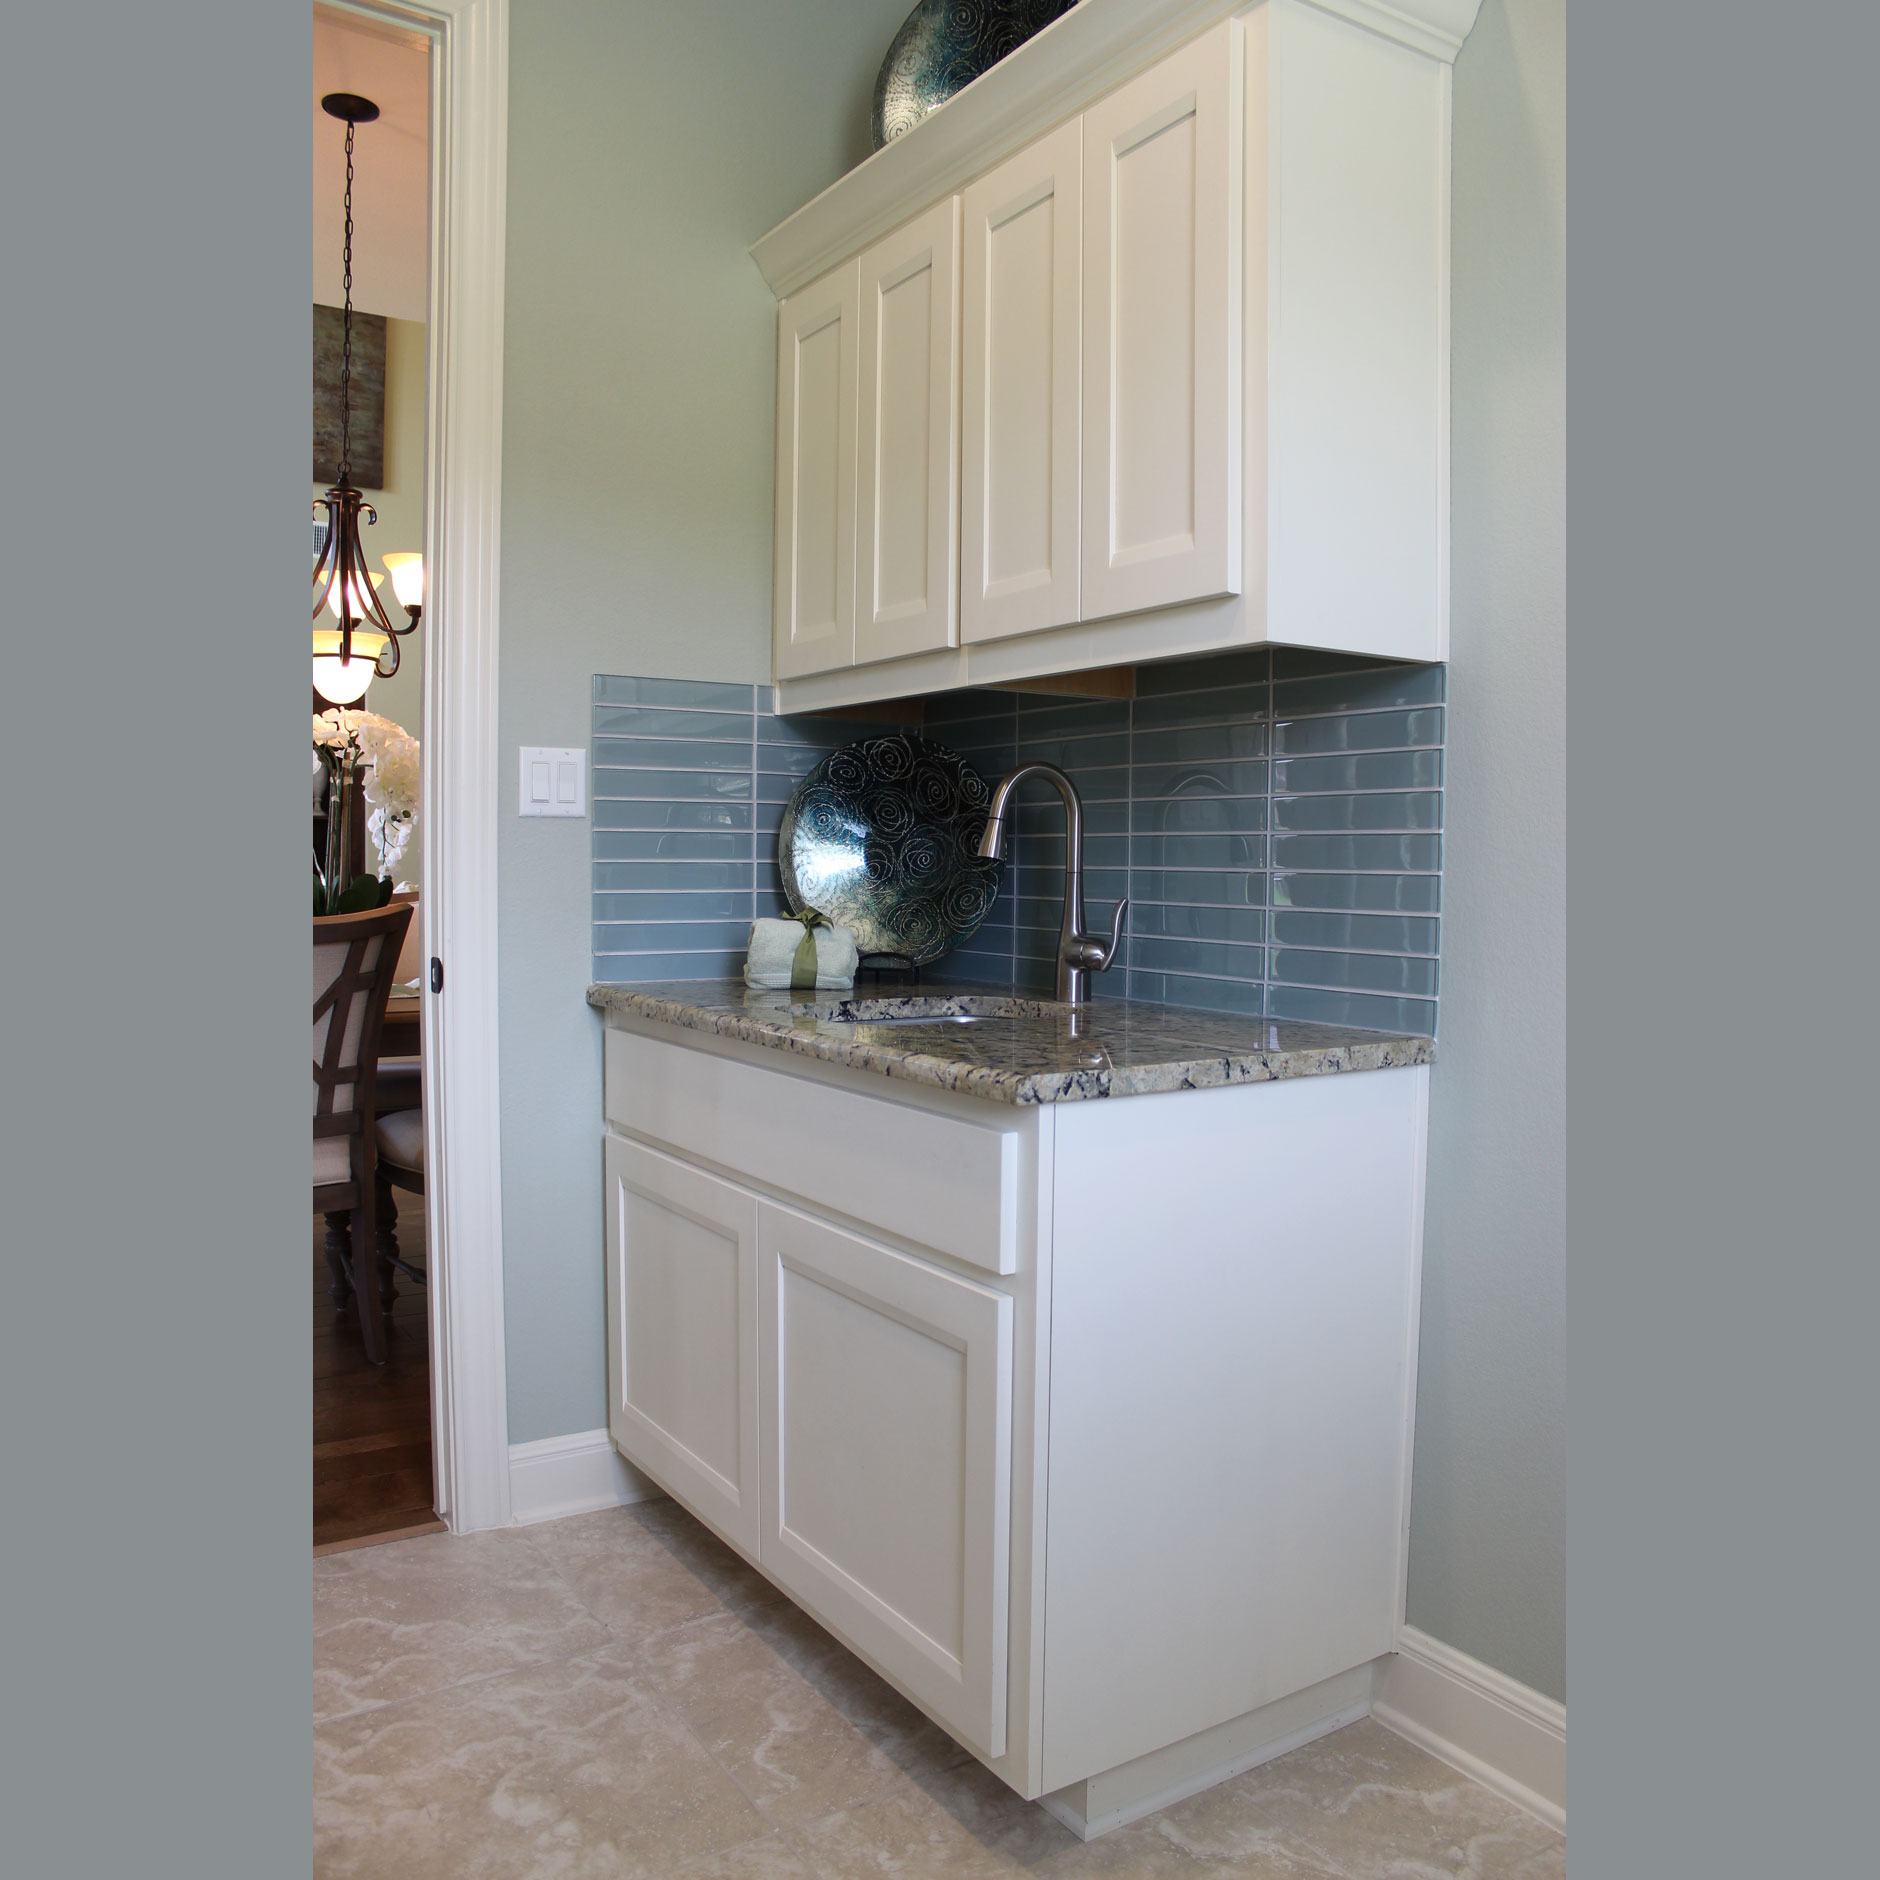 Laundry room cabinets with combination frame cabinet doors MW8 rails and FP1/4 panel in paint grade maple